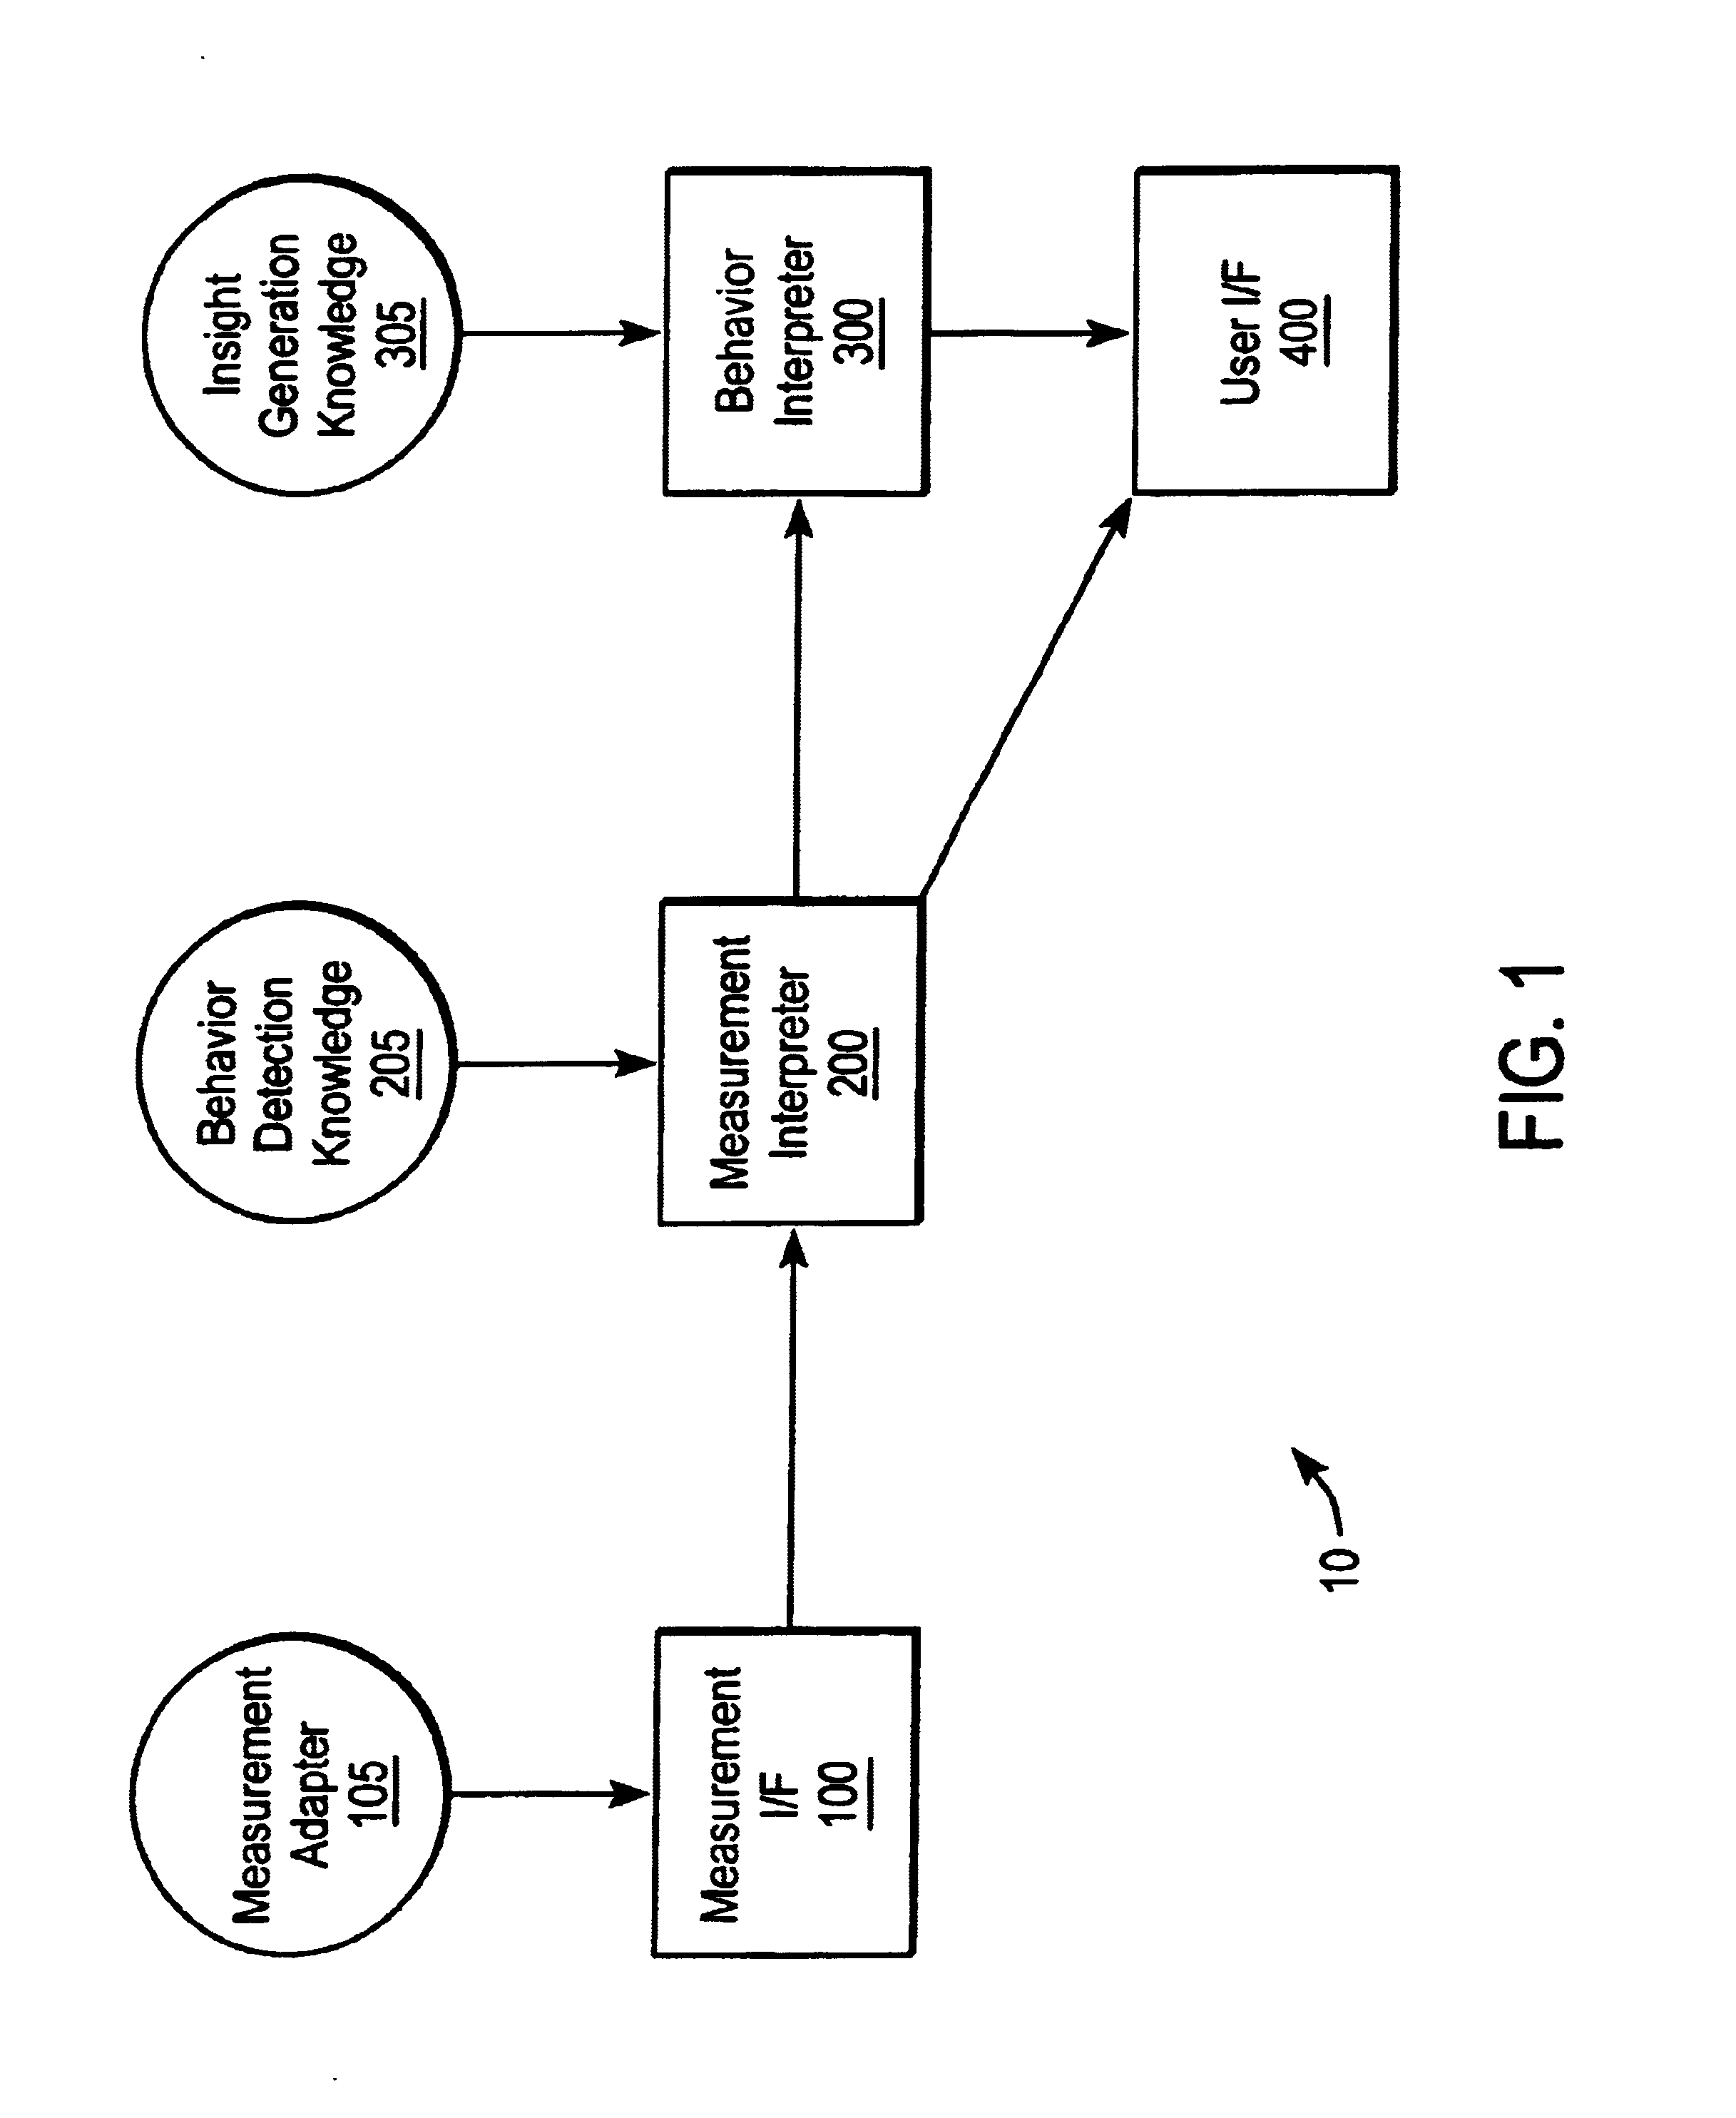 Method and system for automatically interpreting computer system performance measurements